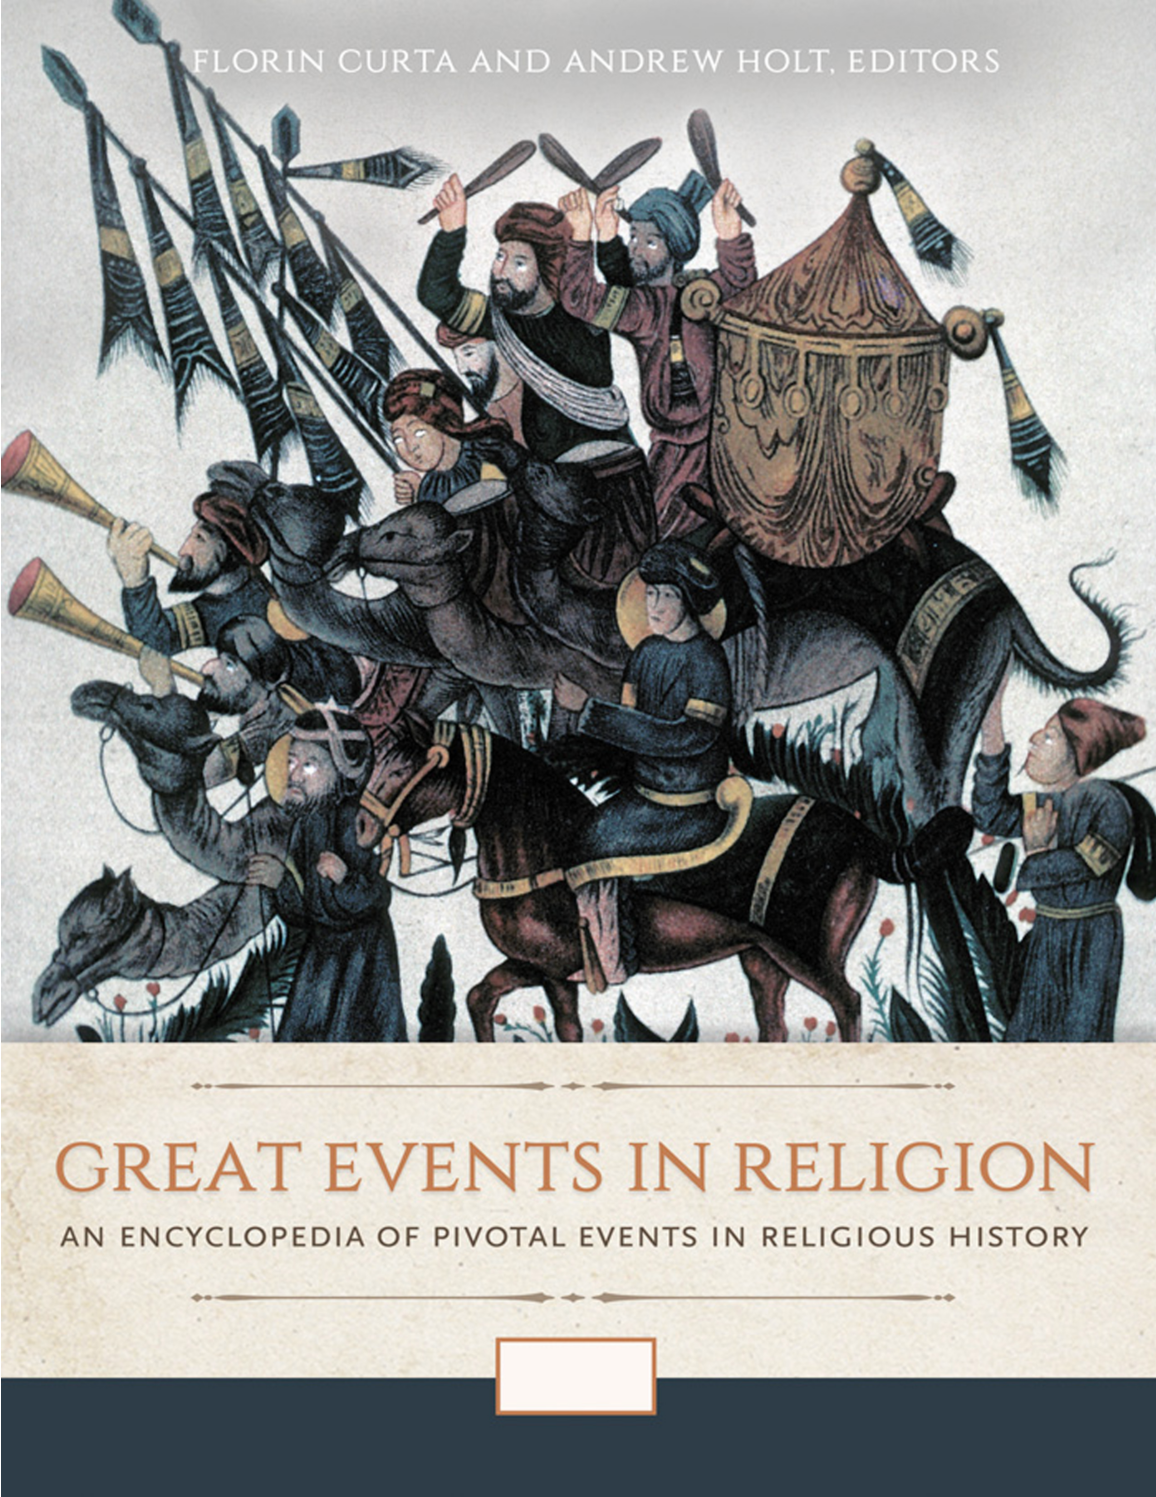 Great Events in Religion: An Encyclopedia of Pivotal Events in Religious History [3 volumes] page Cover1